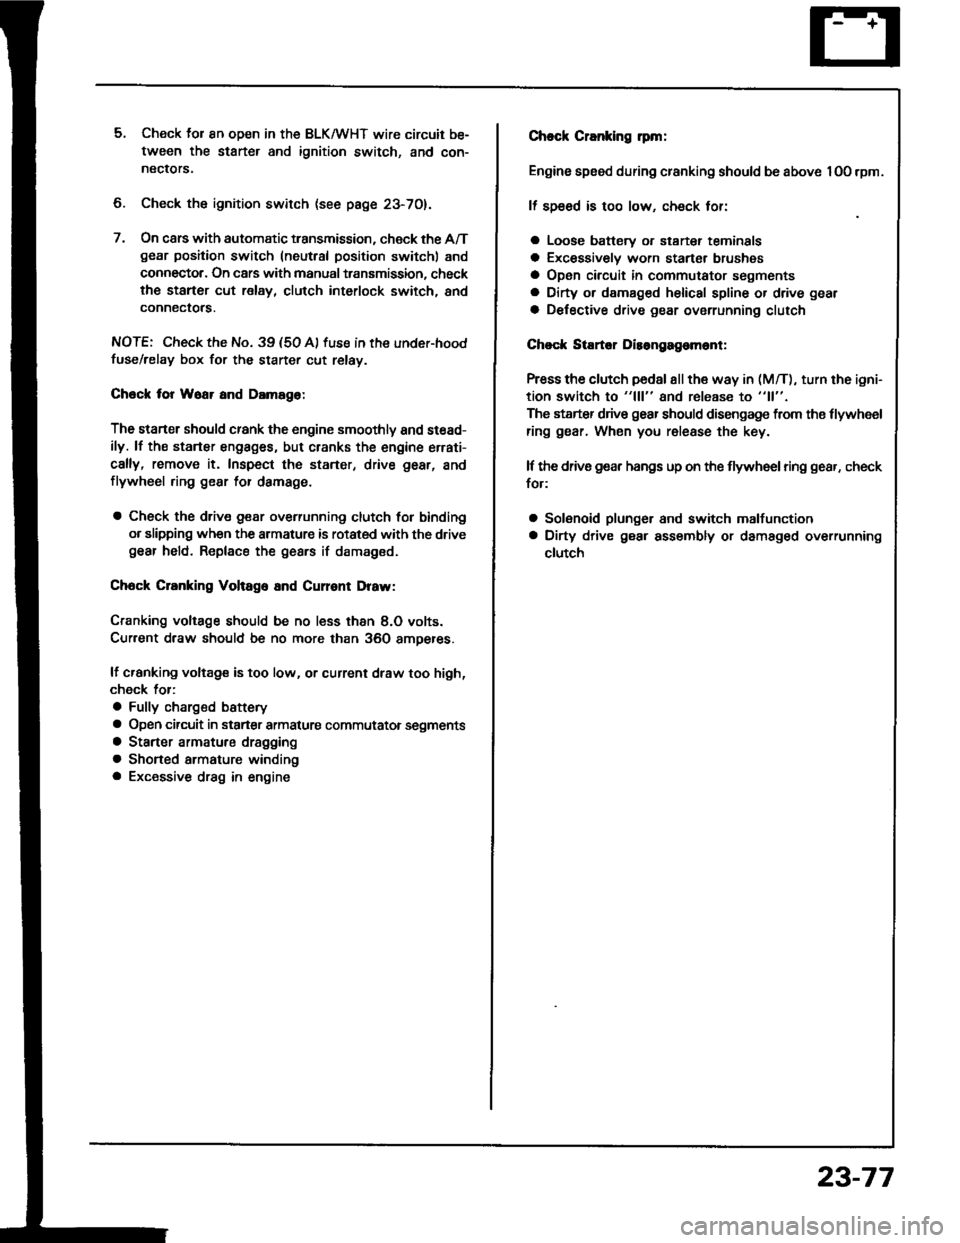 HONDA INTEGRA 1994 4.G User Guide 5. Check lor 8n op€n in the BLKMHT wire circuit be-
tween the staner and ignition switch, and con-
nectors.
6. Check the ignition switch (see page 23-70).
7, On cars with automatic transmission, che